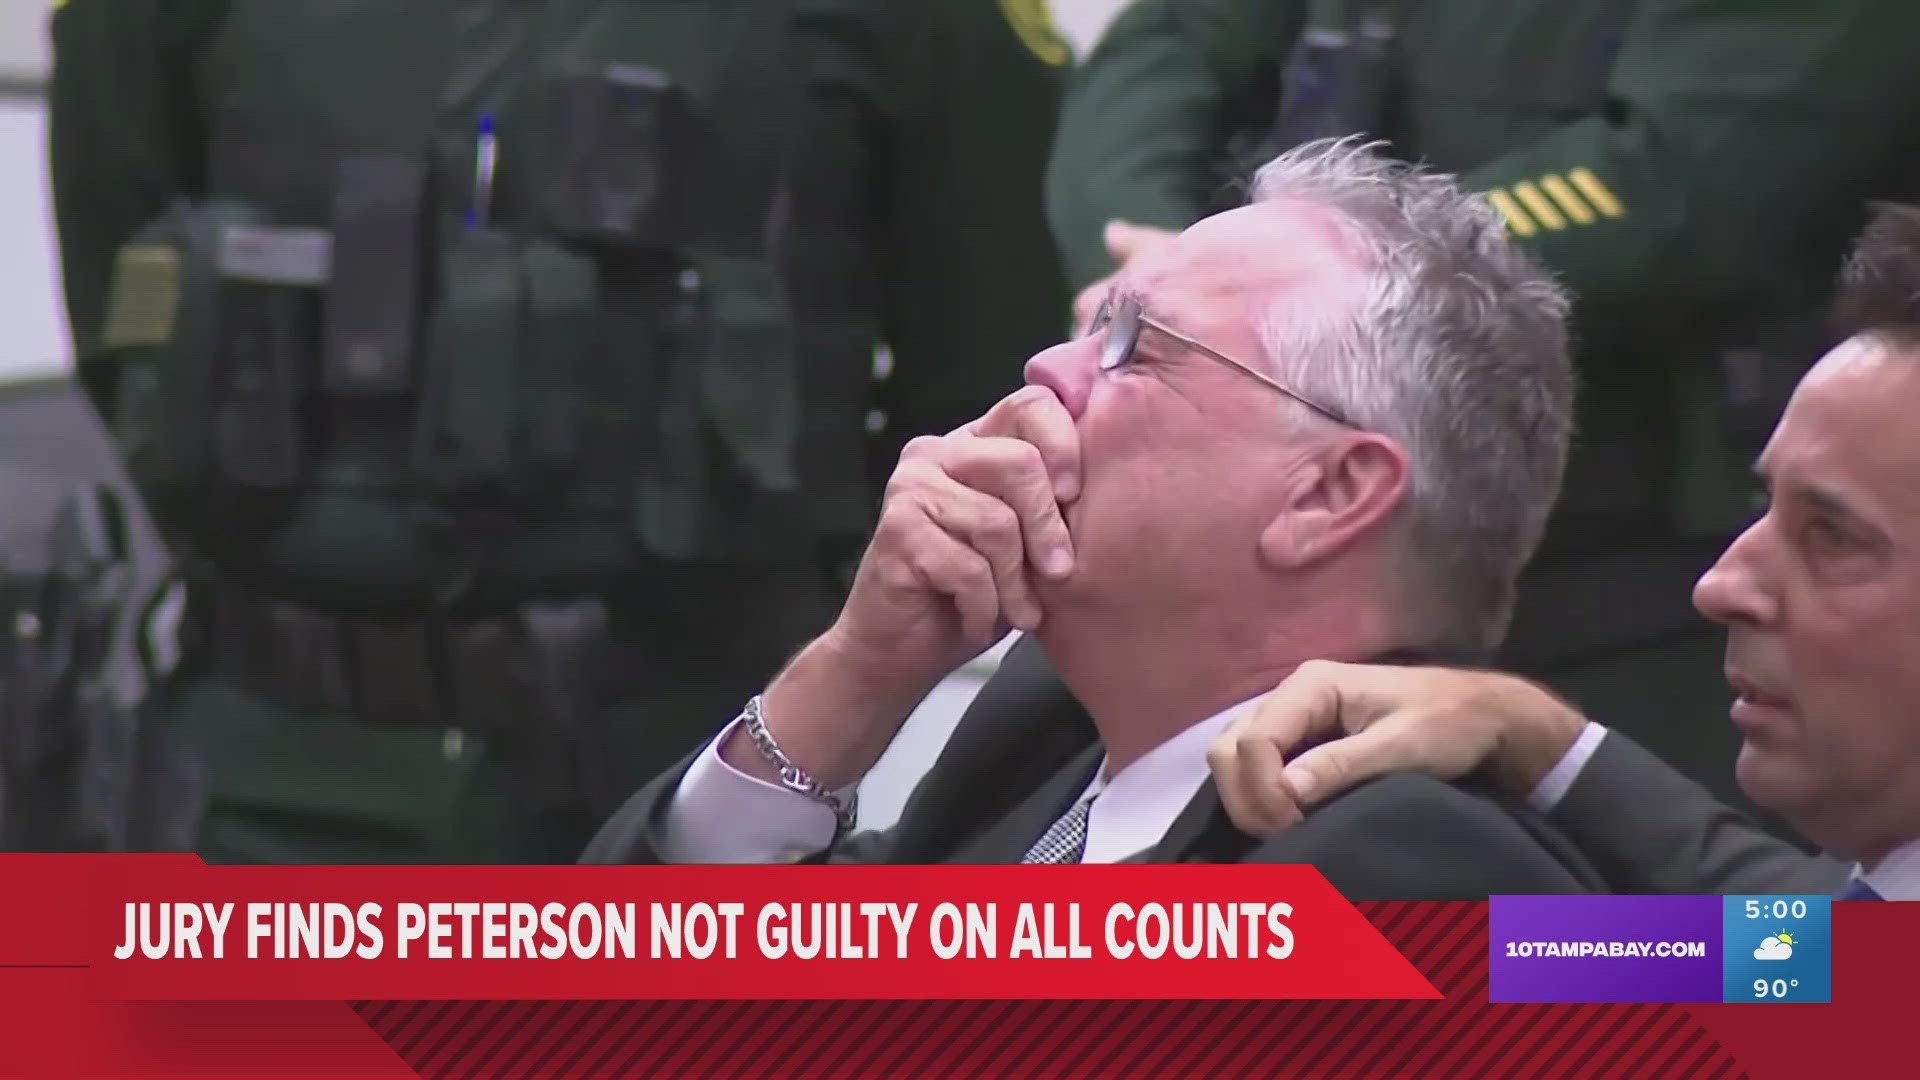 Scot Peterson was charged with neglect of a child and culpable negligence in the 2018 mass shooting at Marjory Stoneman Douglas High School.